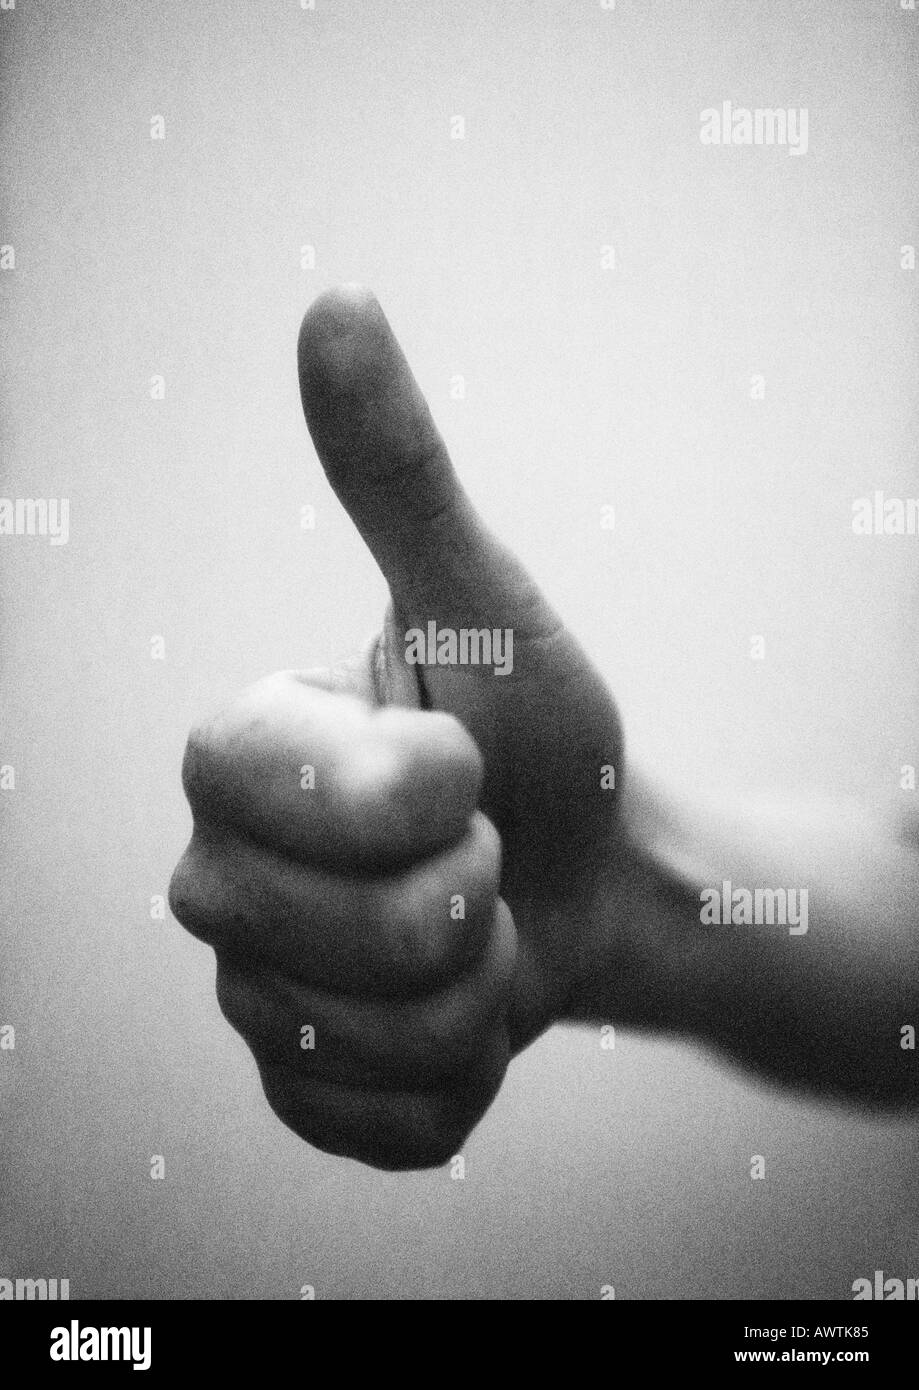 Thumb pointing up, close-up, b&w Stock Photo